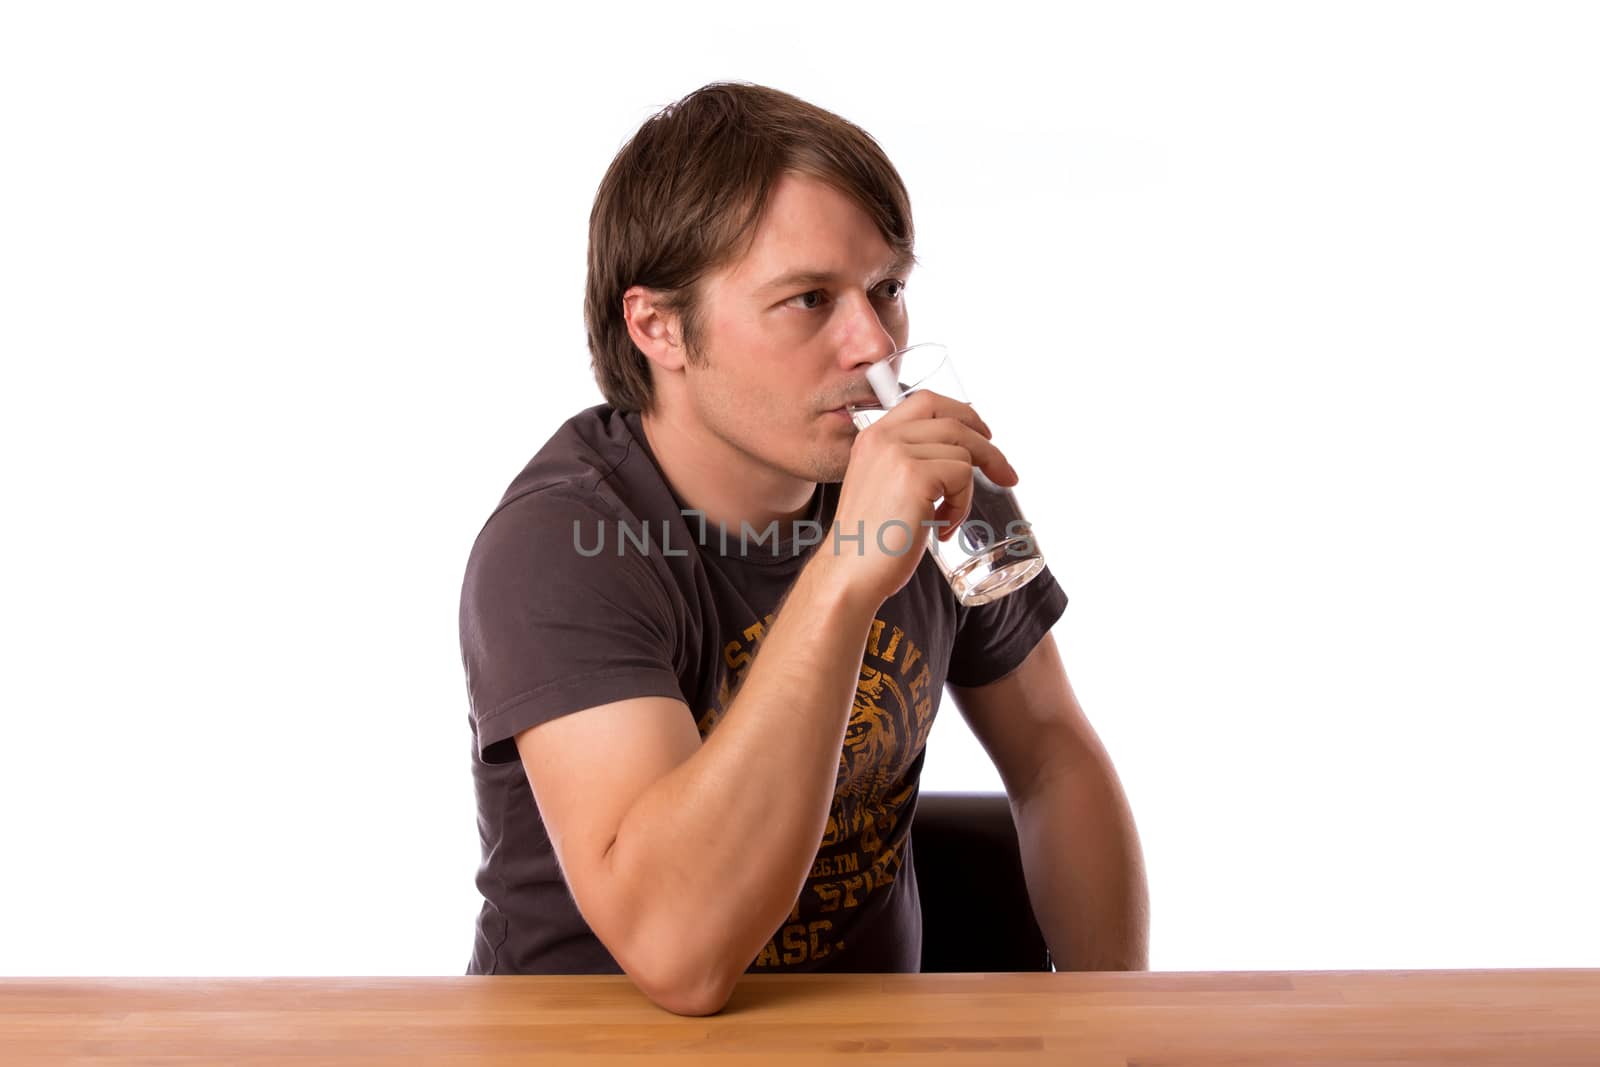 Man sitting at a wooden table and drinking water in a glass. Isolated on a white background